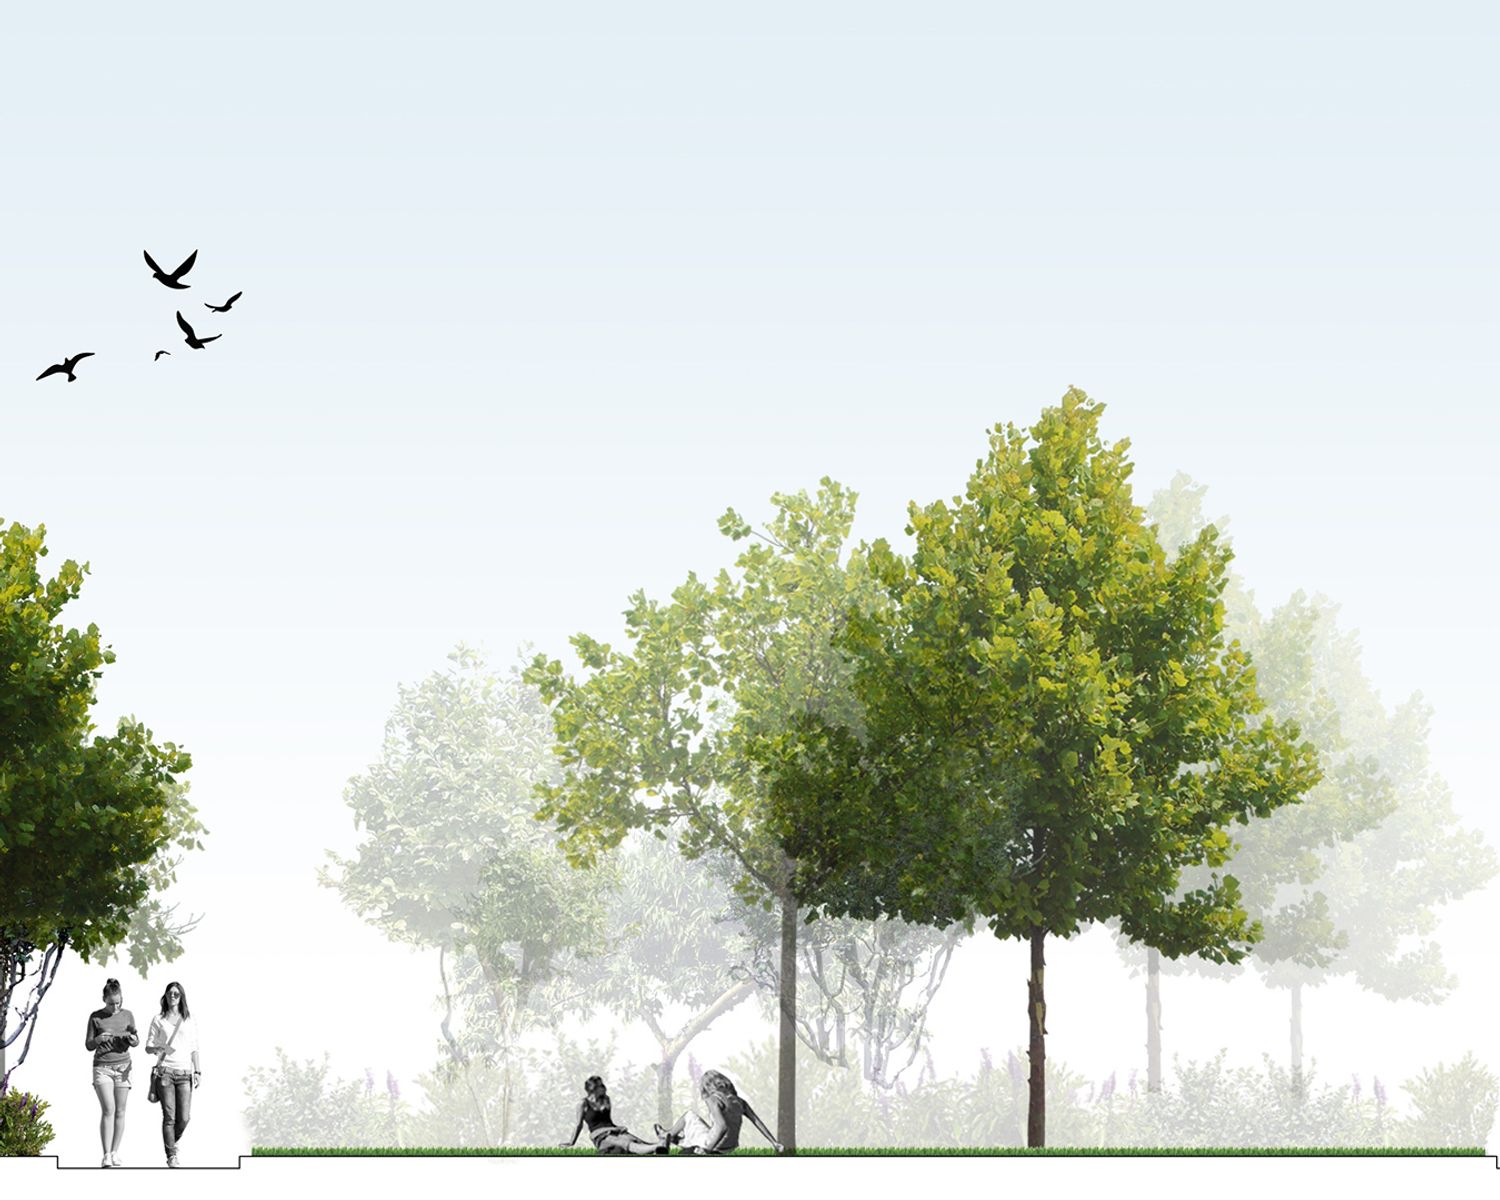 CAD drawing with trees and people in a park